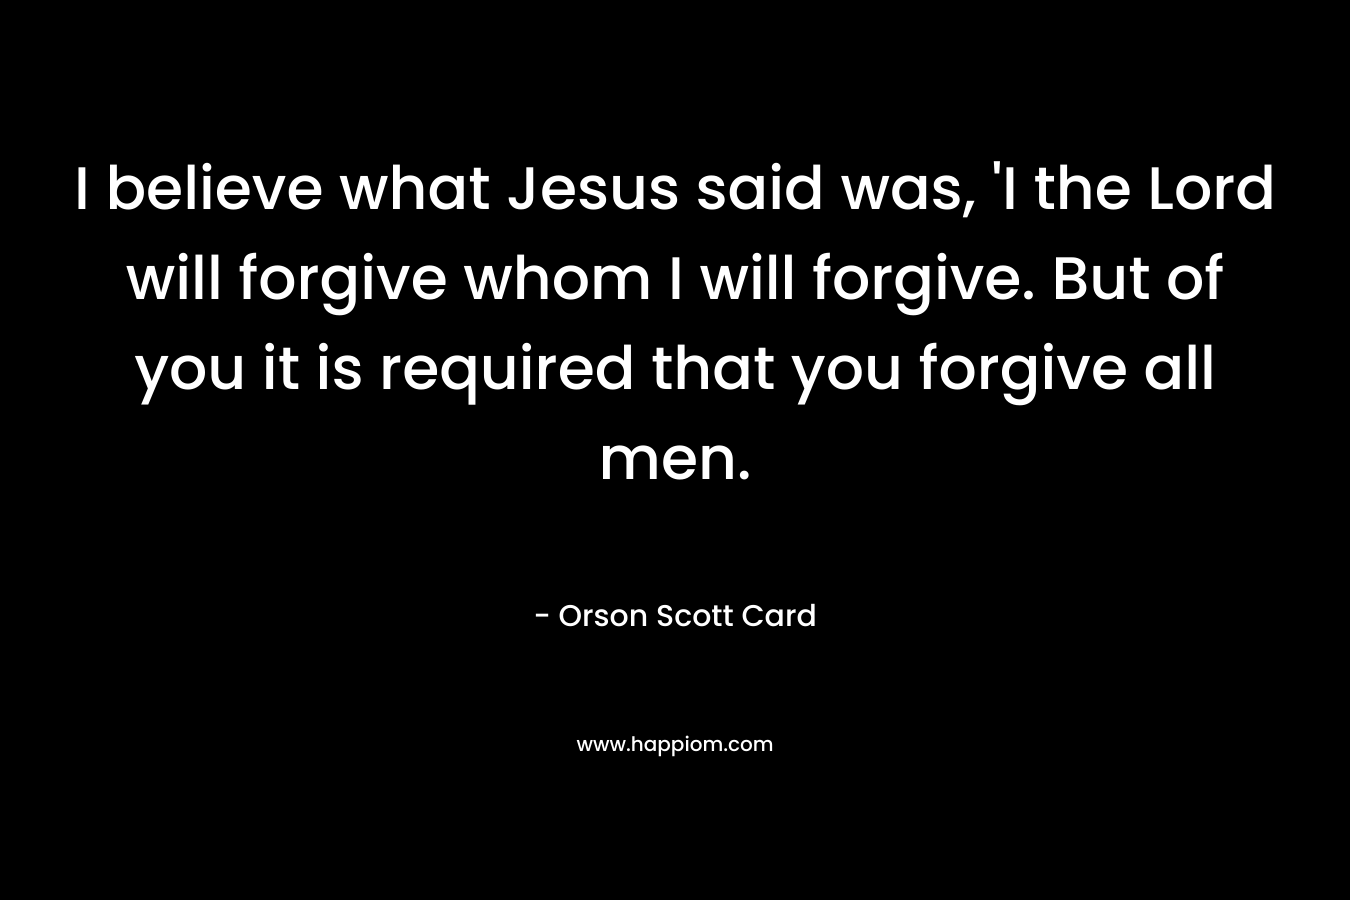 I believe what Jesus said was, 'I the Lord will forgive whom I will forgive. But of you it is required that you forgive all men.